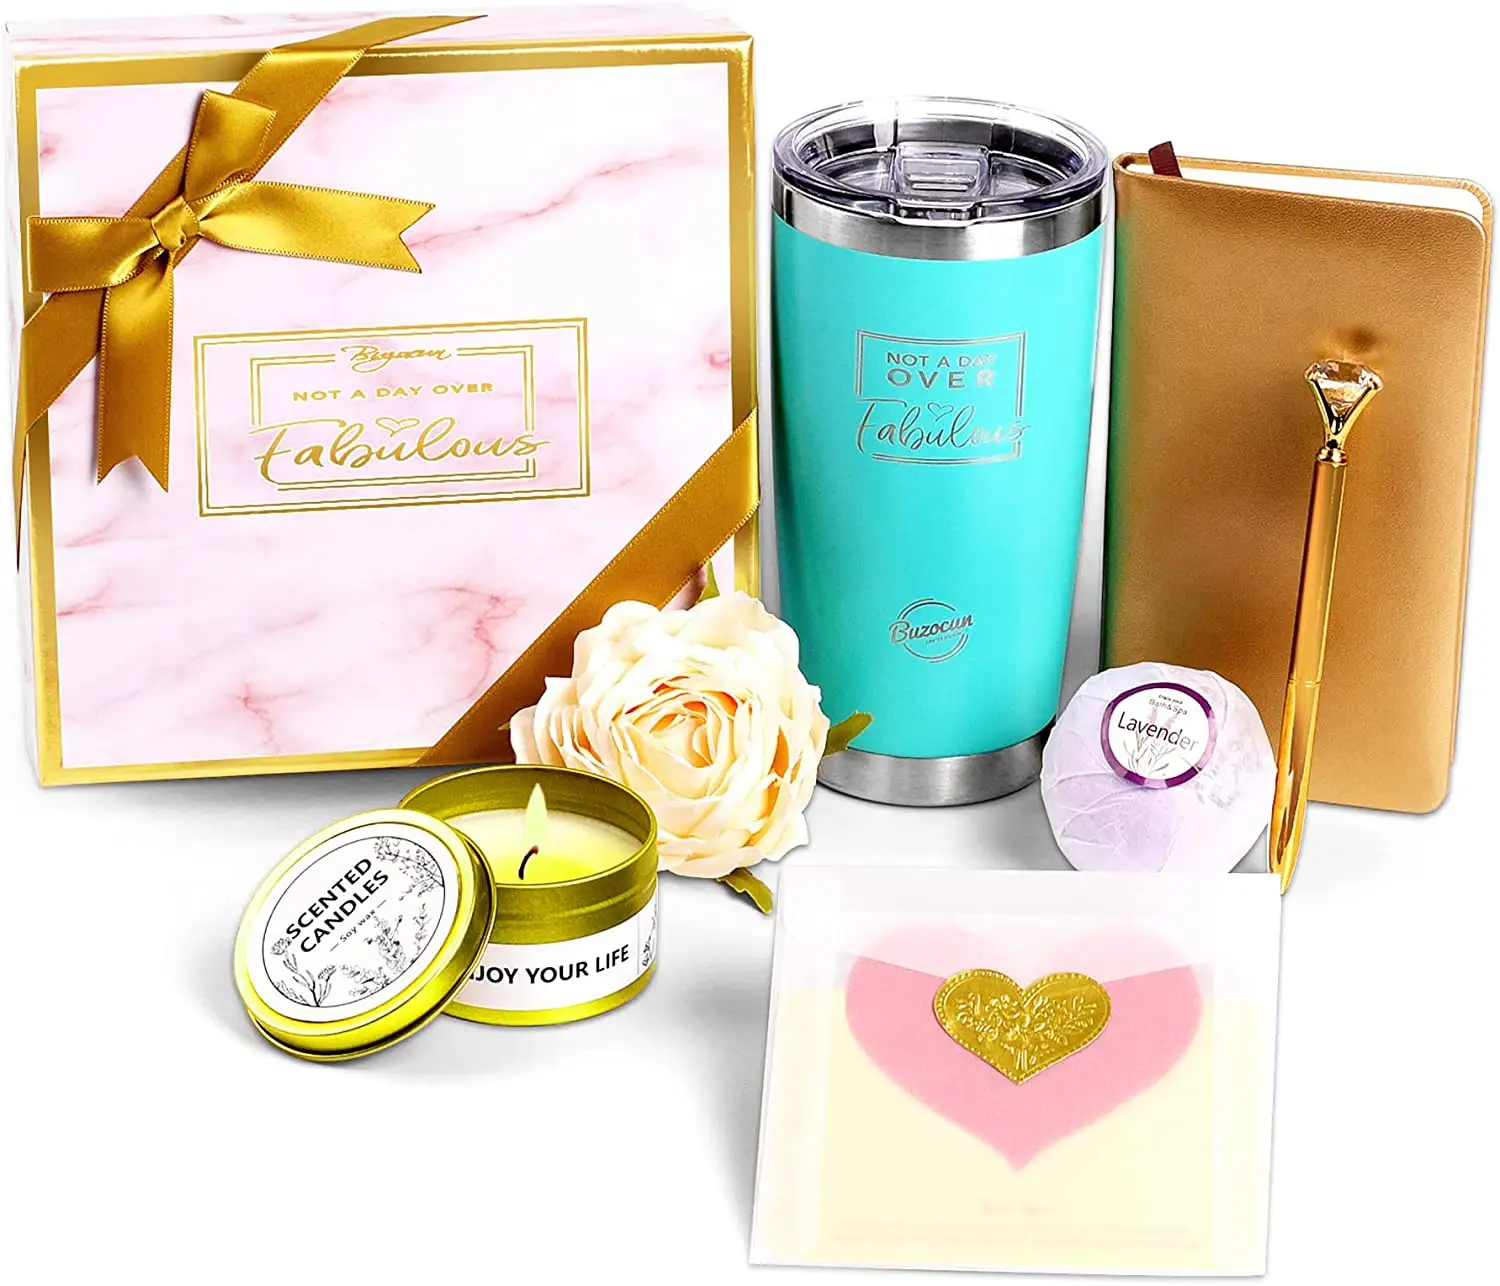 Promotional Products Female Relaxing Present Baskets Ideas Wine Tumbler Women Gift Set Box For Birthday